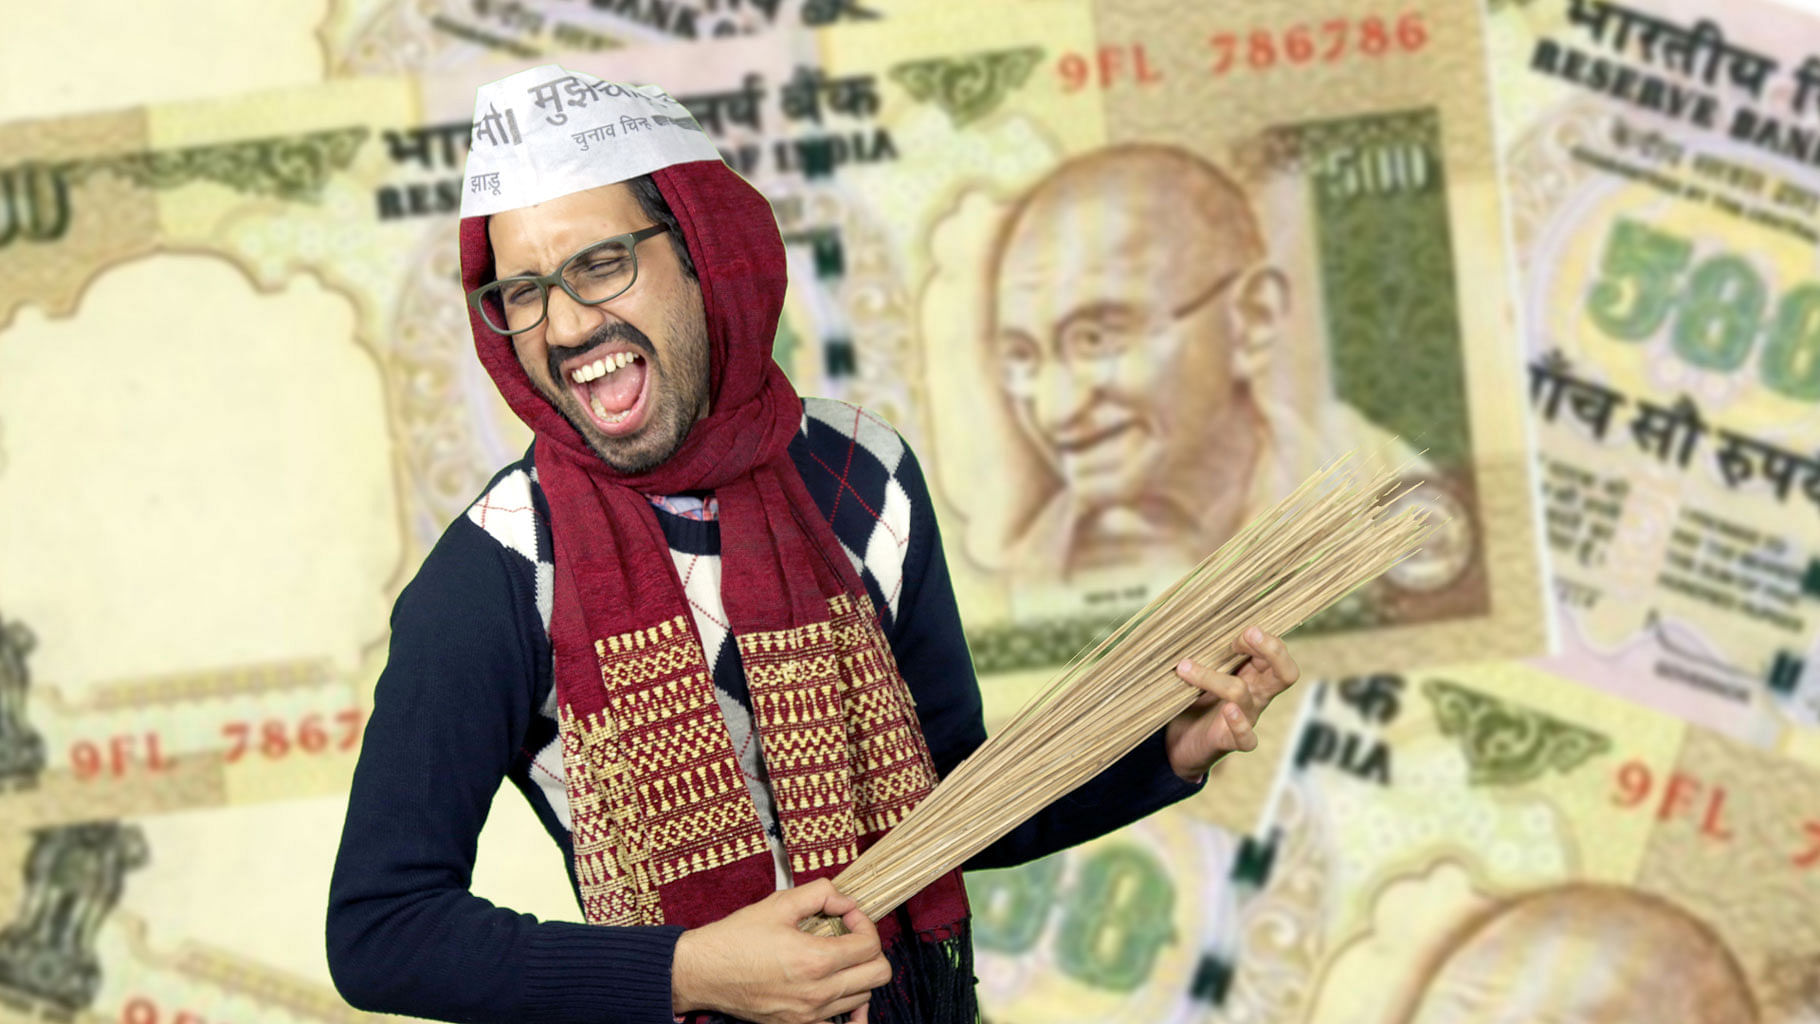 MufflerMan after spending Rs 200 crore on a PR exercise (Photo: The Quint)